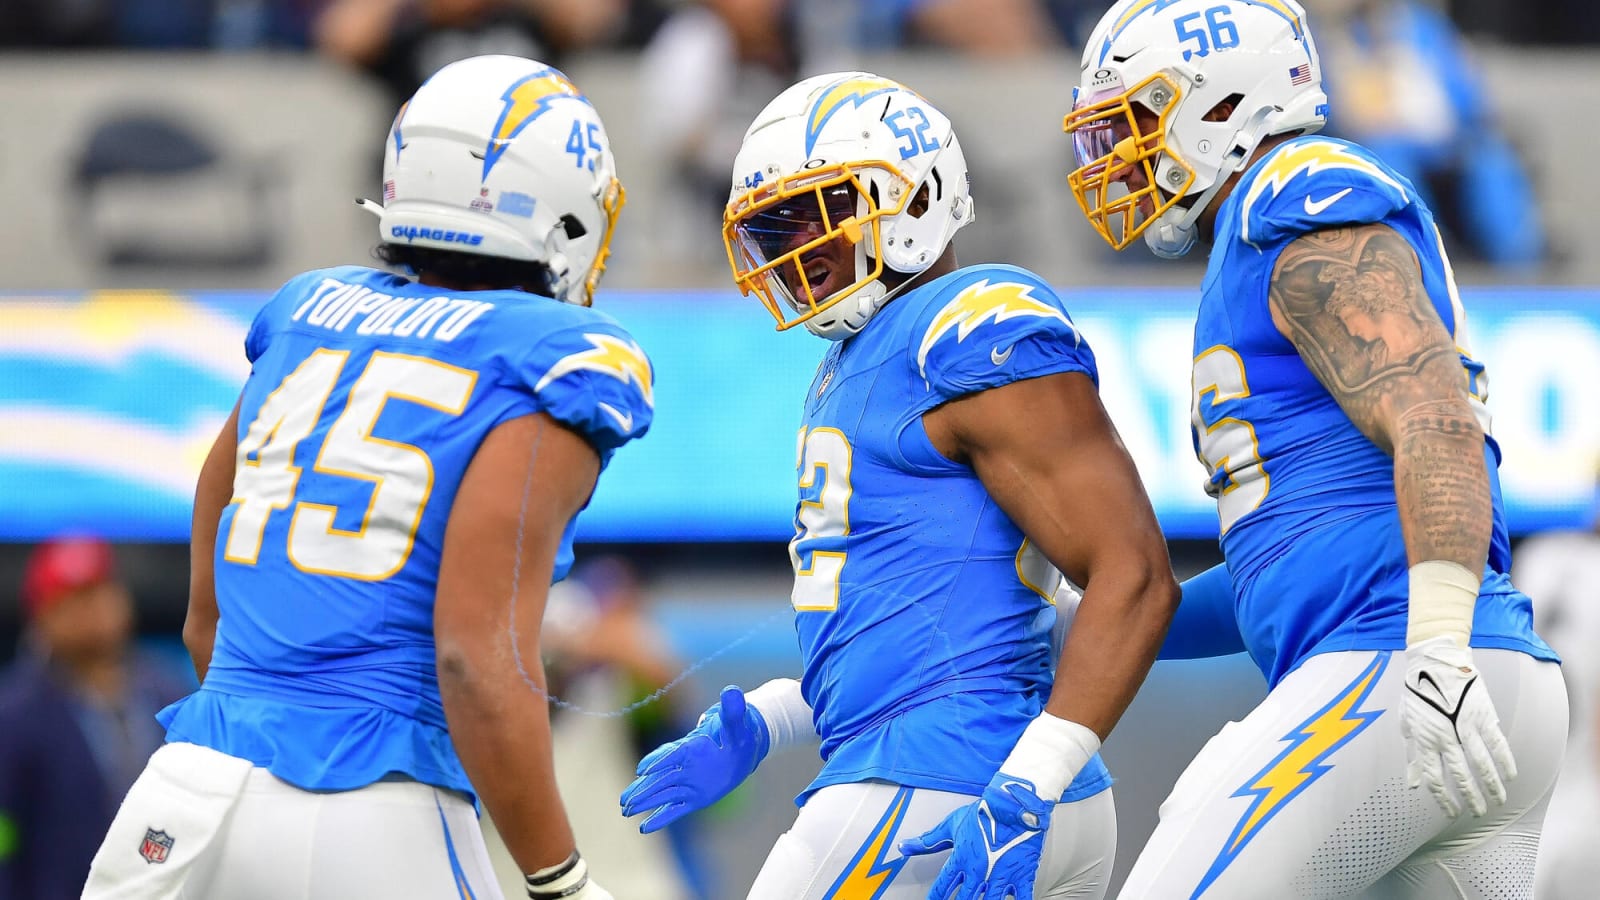 Los Angeles Chargers Week 4 Power Rankings: Where Do They Rank?